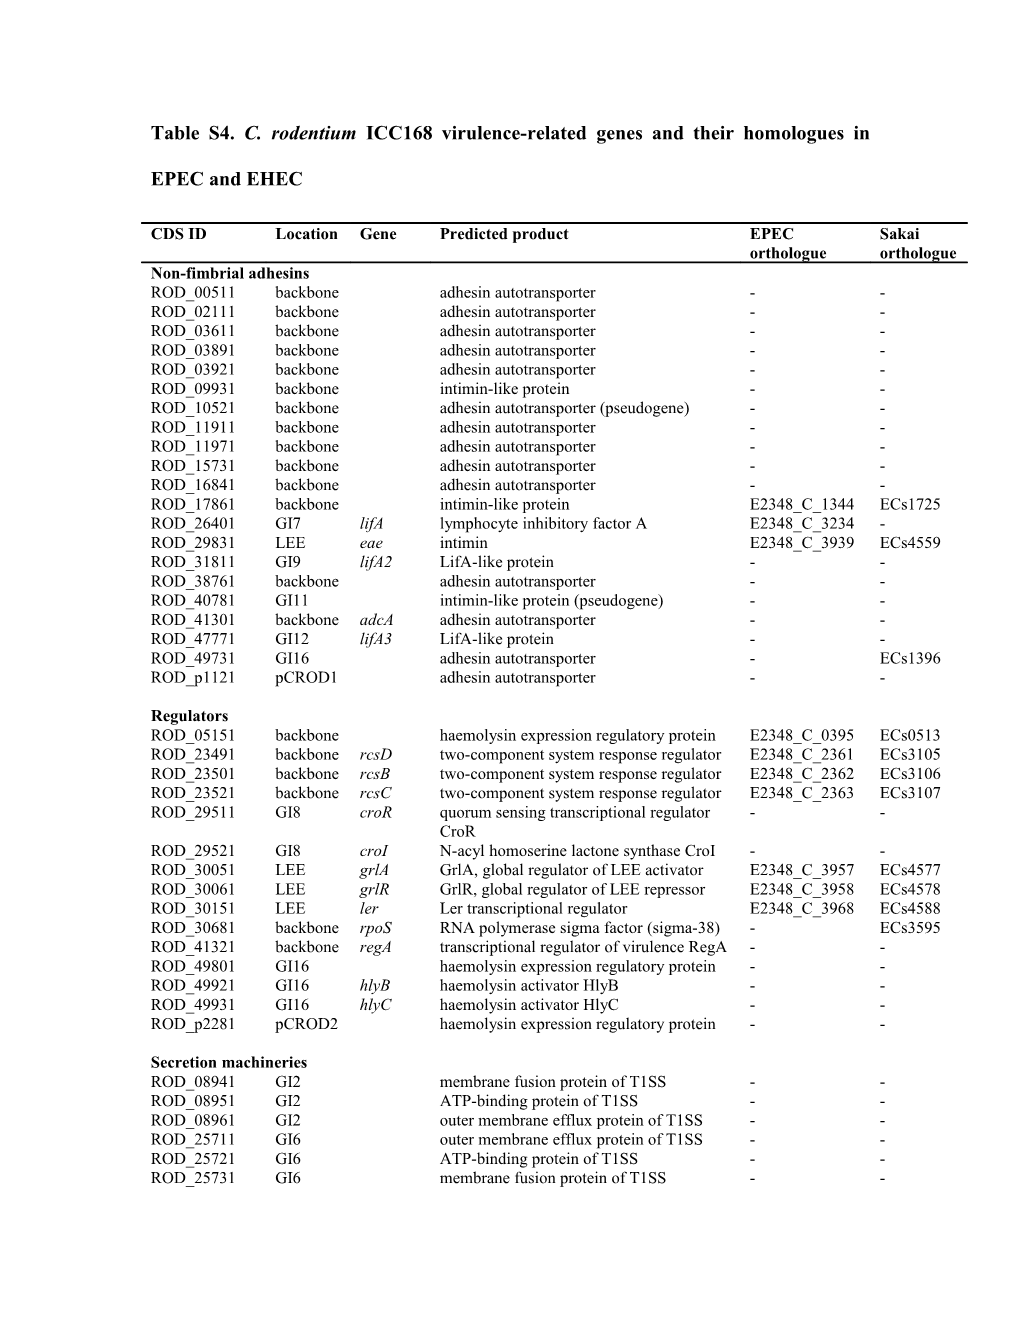 Table S4. C. Rodentium ICC168 Virulence-Related Genes and Their Homologues in EPEC and EHEC